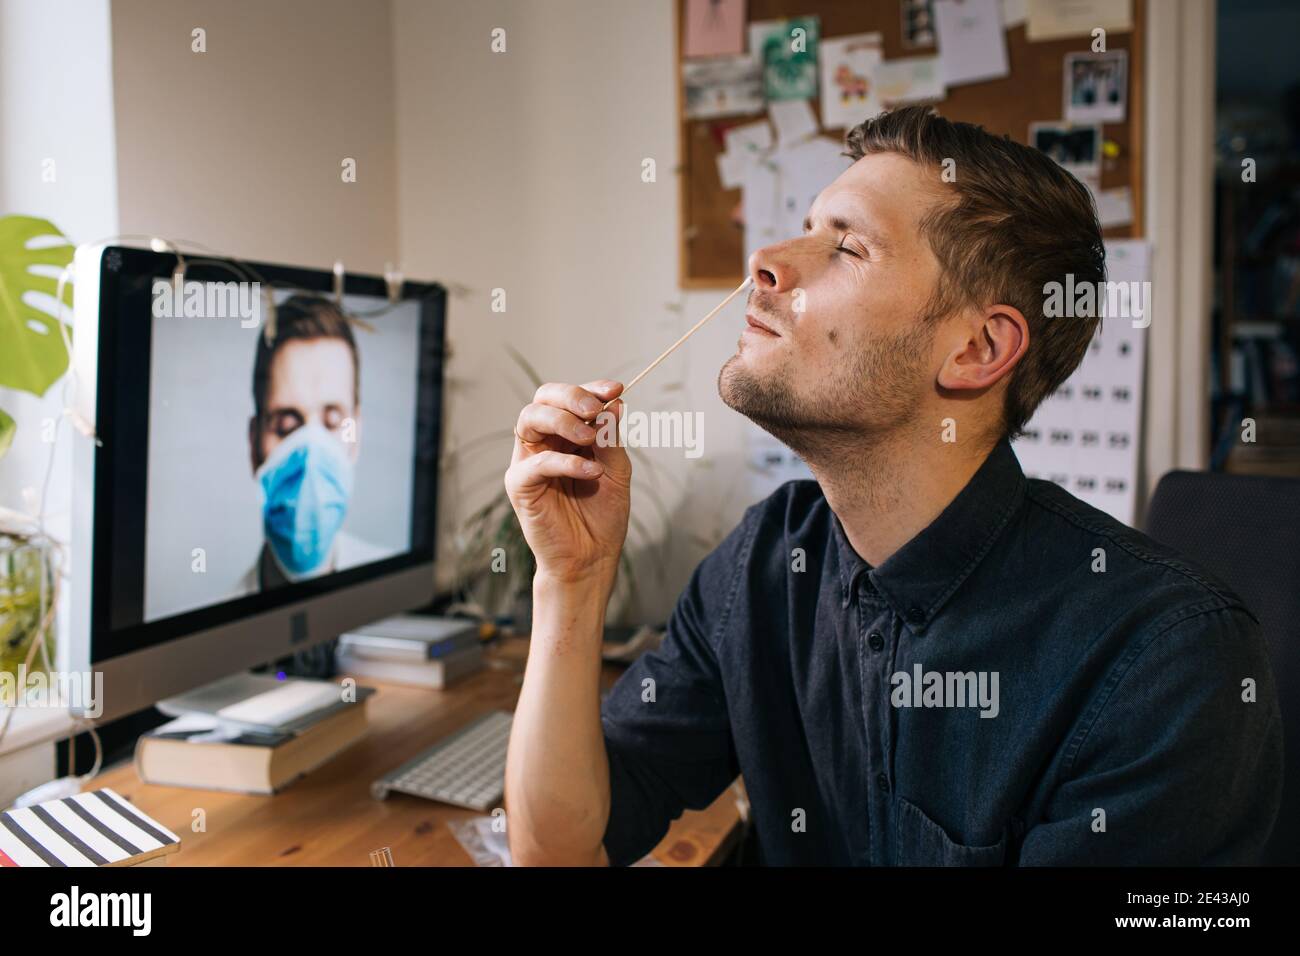 Man self test for COVID-19 home test kit. Coronavirus nasal swab test for infection. Telemedicine and Telehealth distribution of health-related Stock Photo